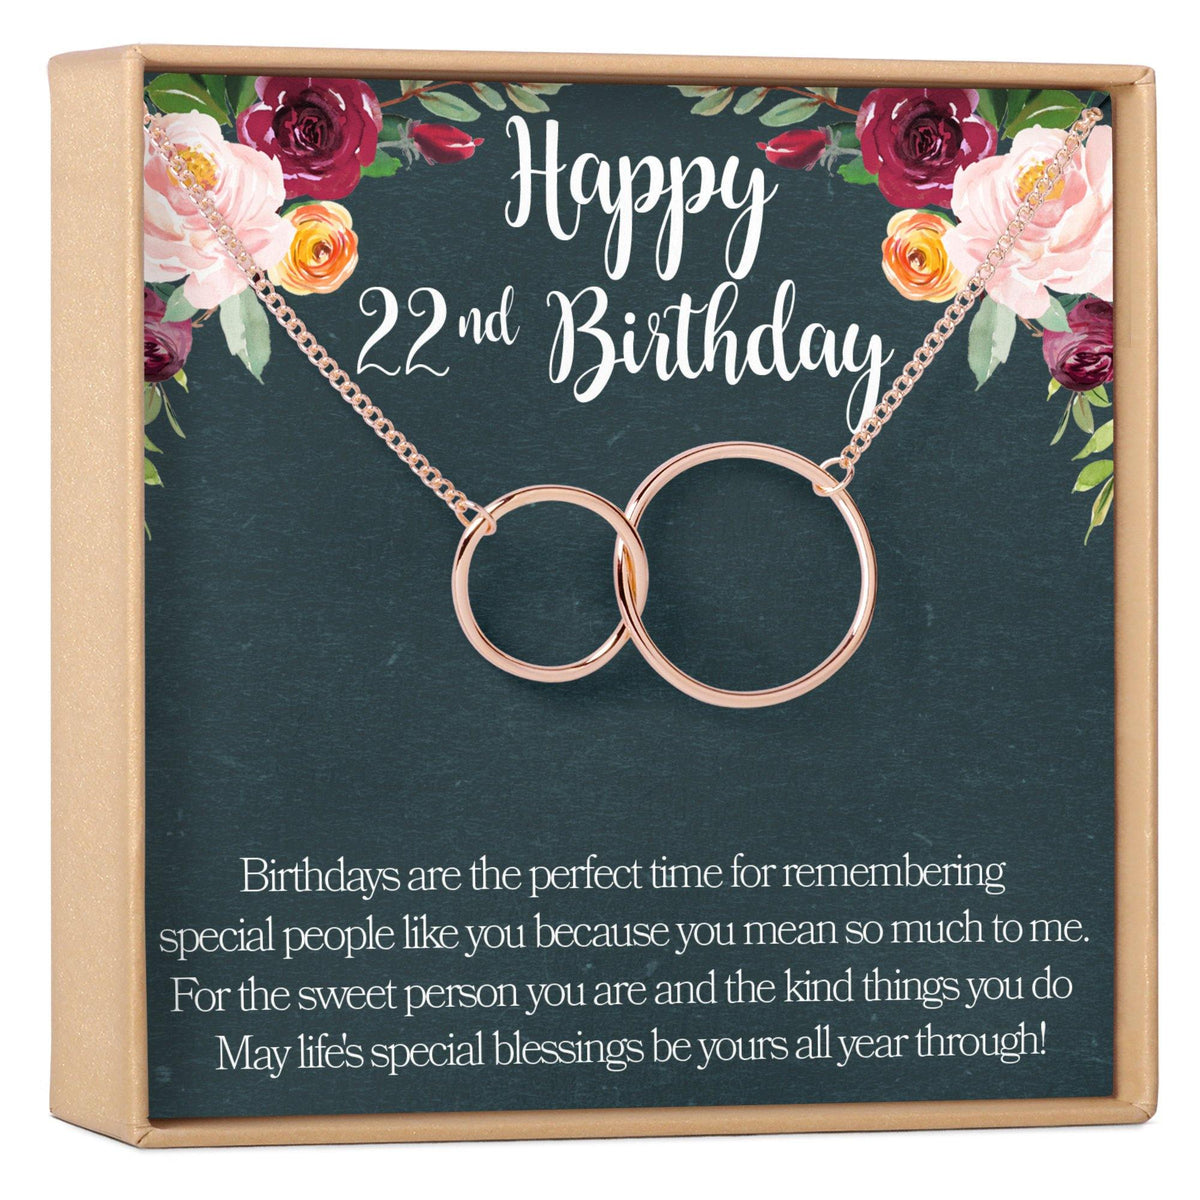 22nd Birthday Necklace - Dear Ava, Jewelry / Necklaces / Pendants